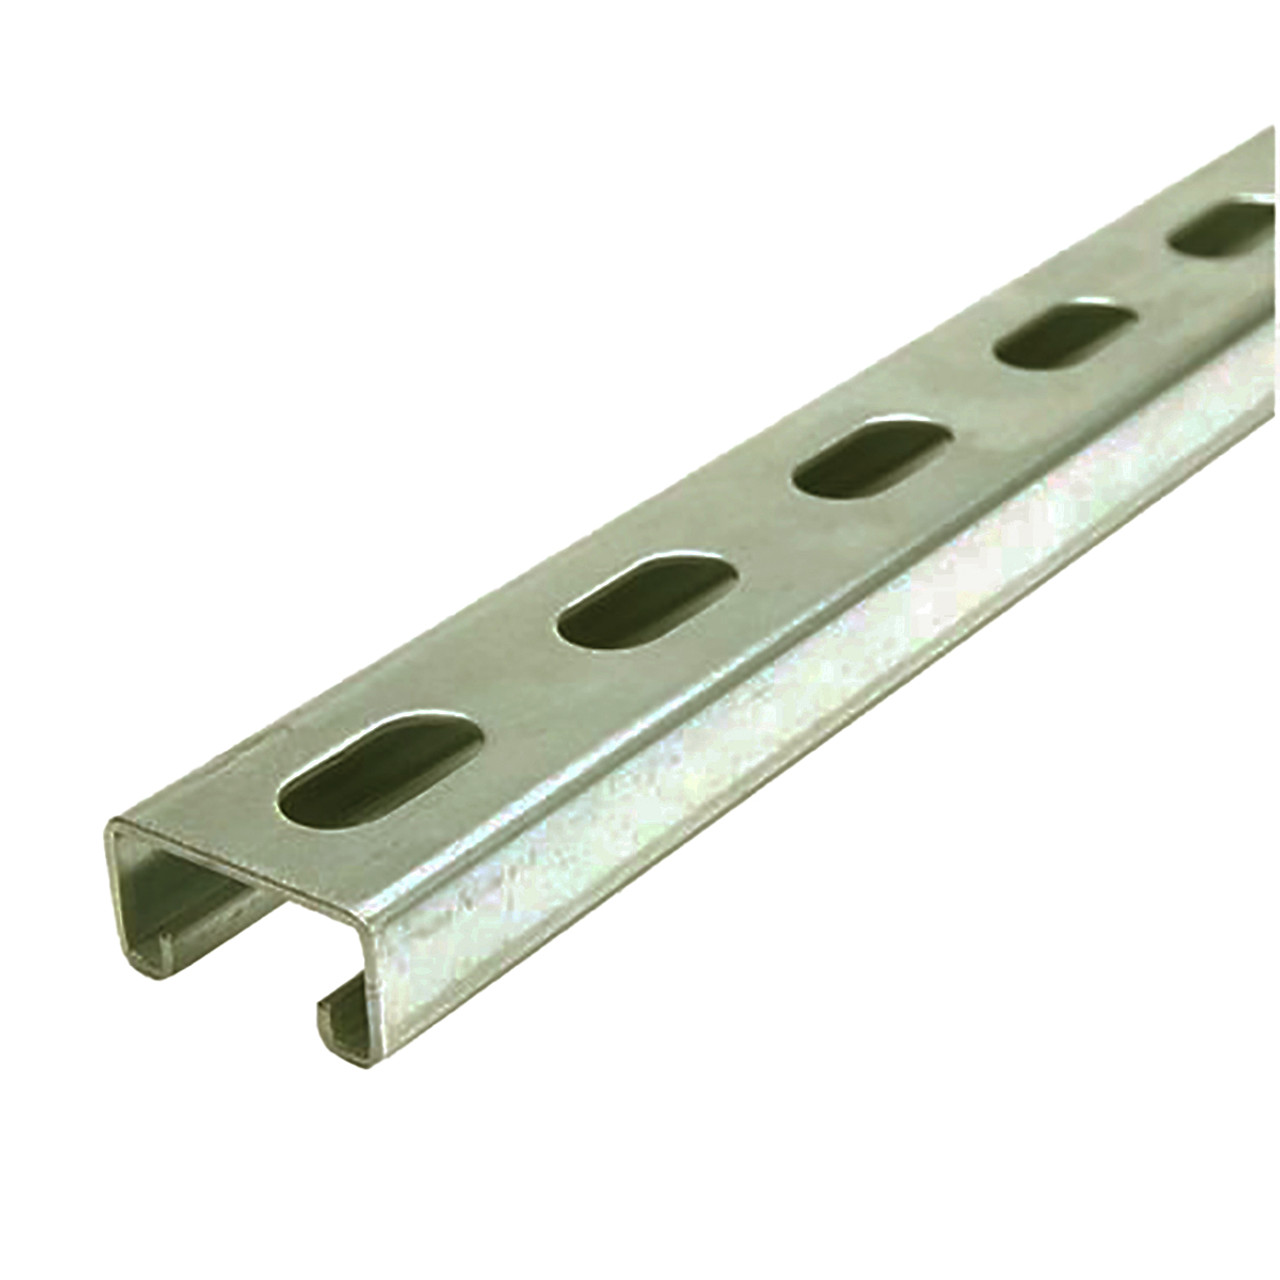 0.812" x 1.625" x 36 inches, Gold Galvanized Steel, Slotted Strut Channel, 12 ga.